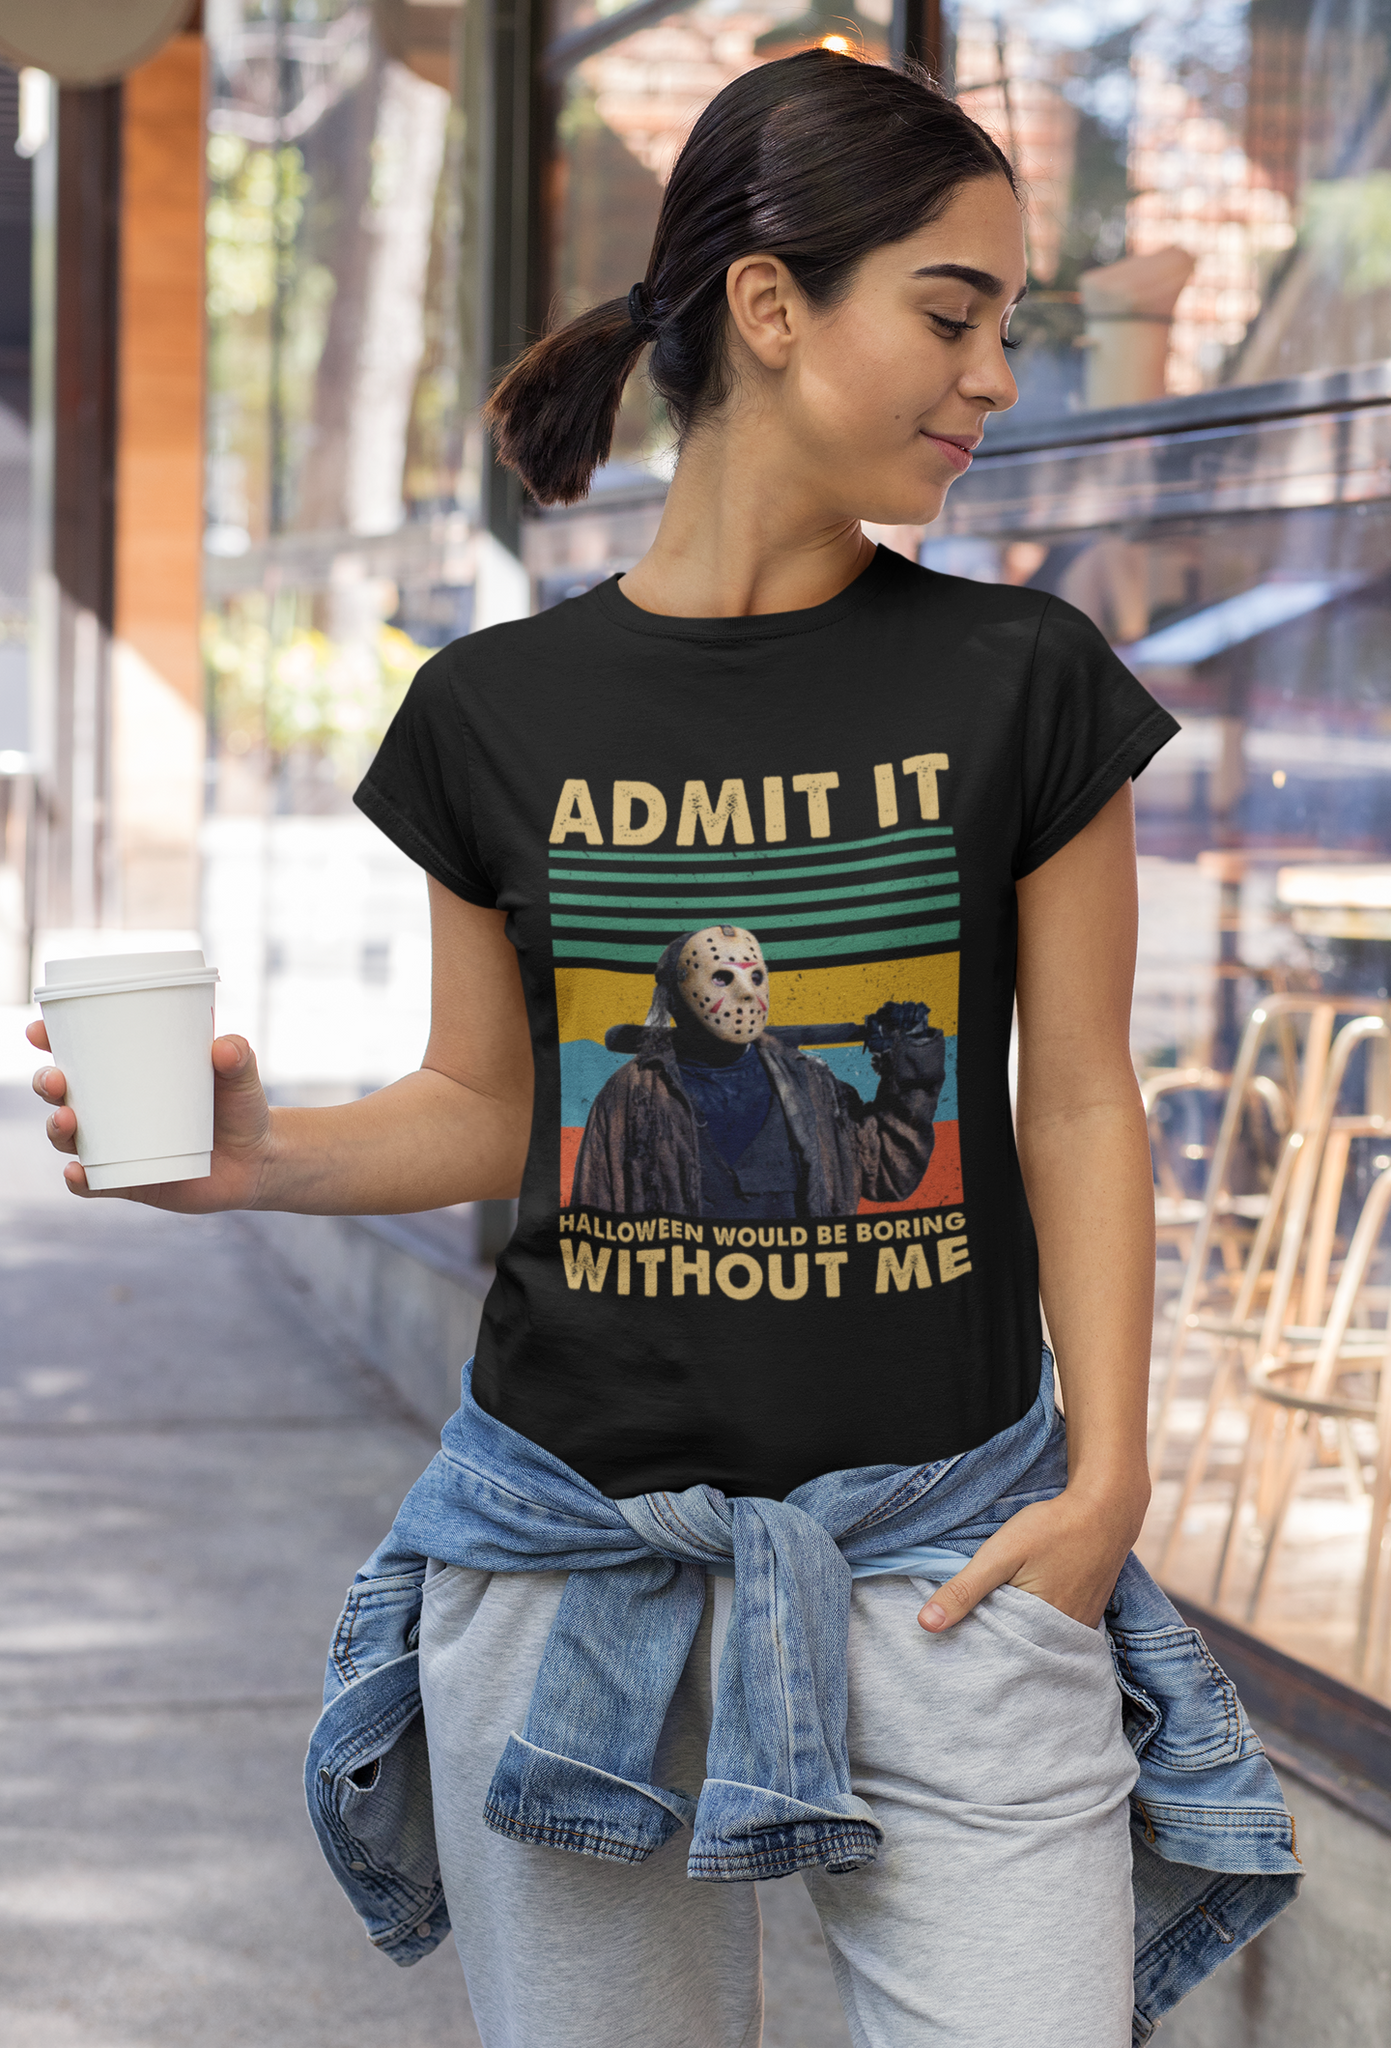 Friday 13th Vintage T Shirt, Admit It Halloween Would Be Boring Without Me Tshirt, Jason Voorhees T Shirt, Halloween Gifts